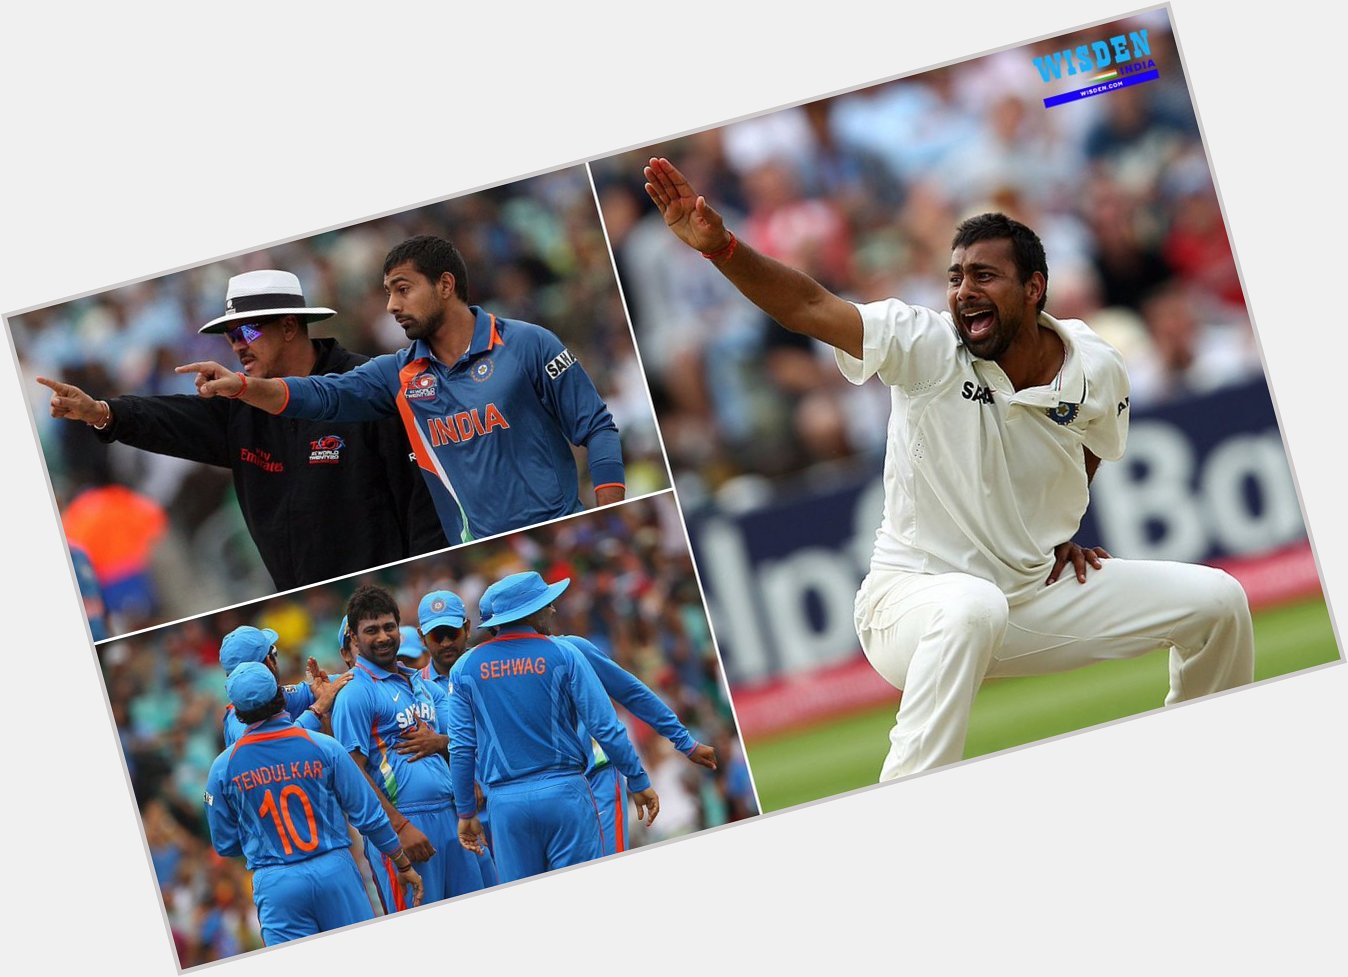 Happy birthday, Praveen Kumar!

Do you think the seamer should have played more games for India? 